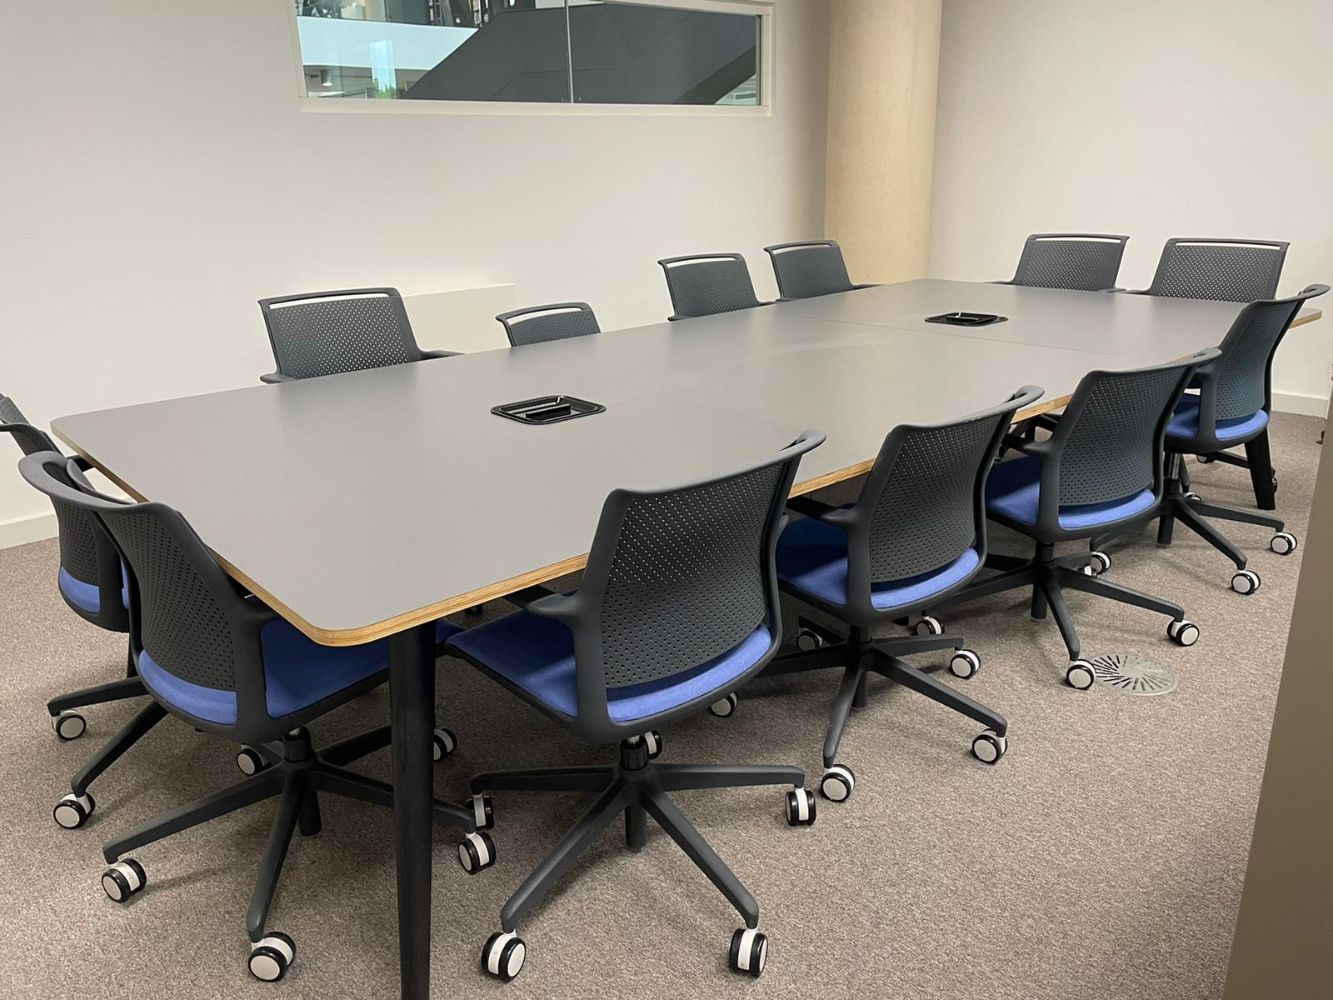 2 Senator Conference Desks Complete With Chairs- No RESERVE - Location: Northampton University Waterside Campus